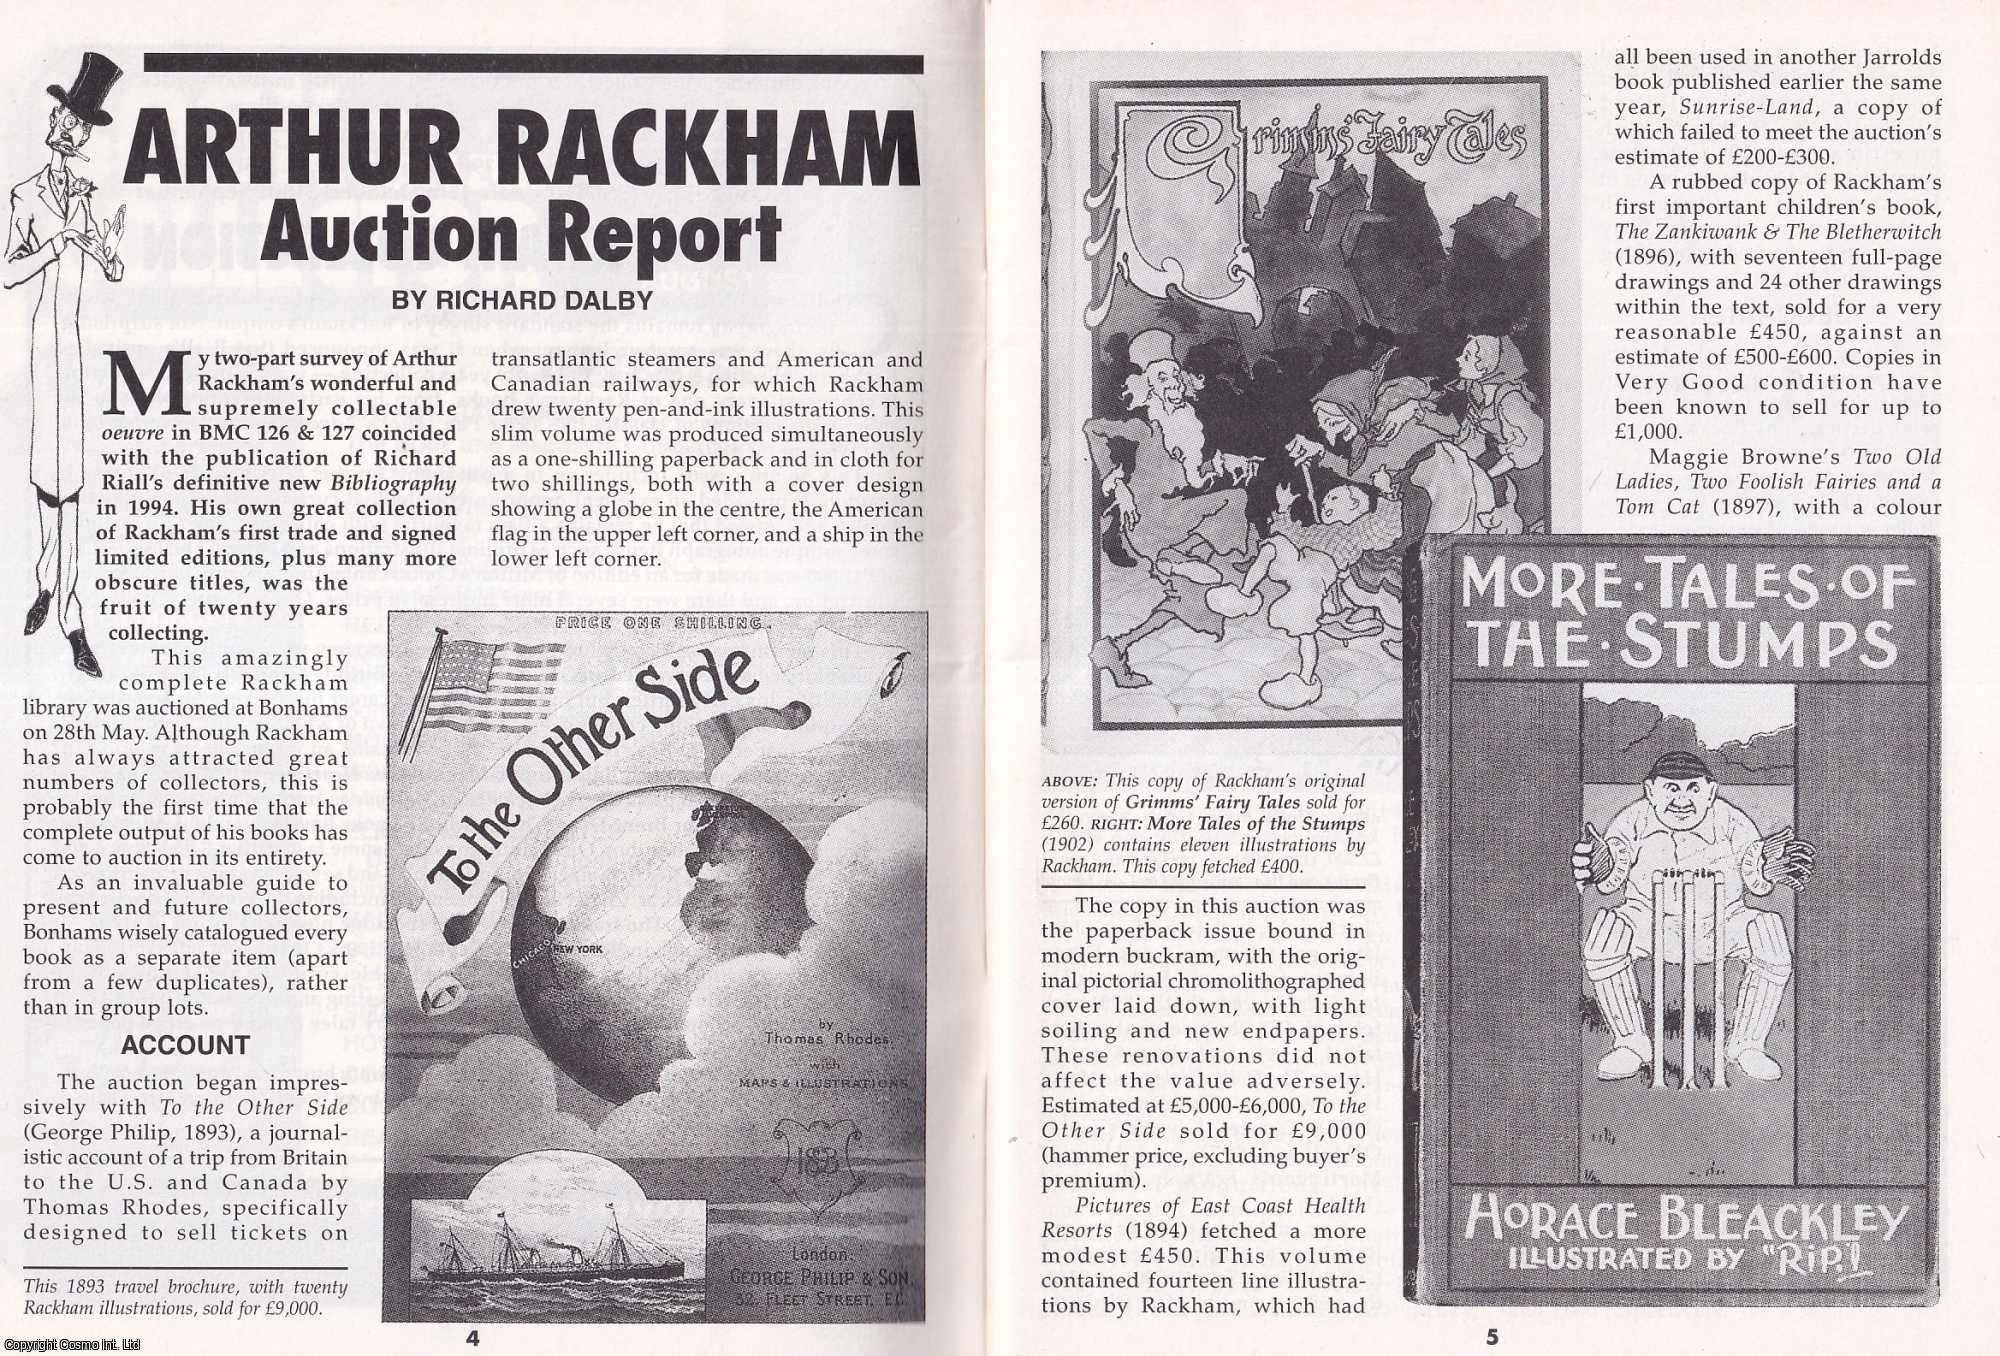 Richard Dalby - Arthur Rackham : Richard Riall's Collection at Auction. This is an original article separated from an issue of The Book & Magazine Collector publication, 2002.